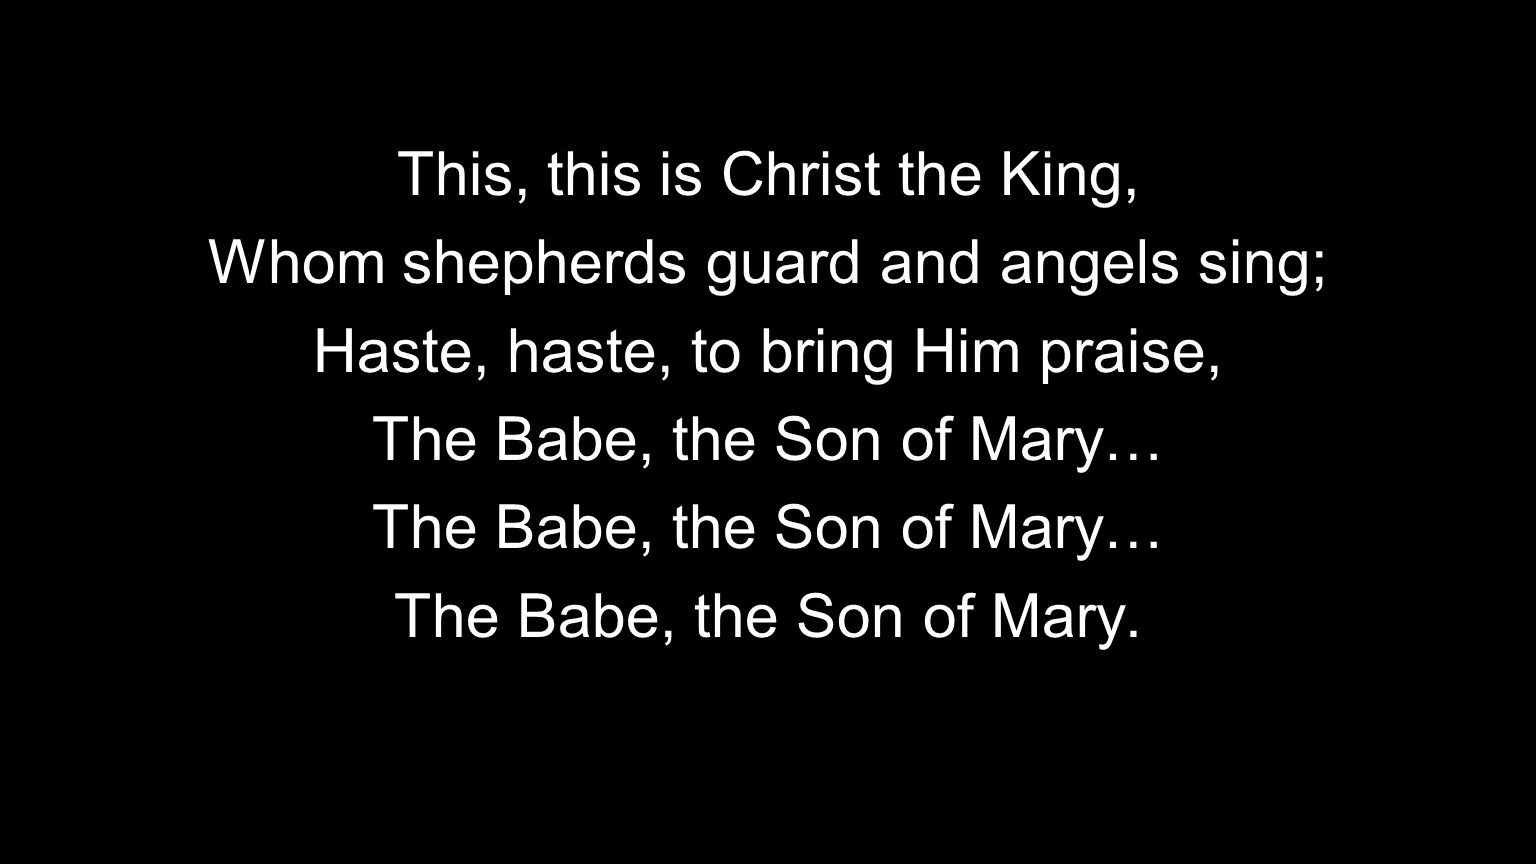 This, this is Christ the King, Whom shepherds guard and angels sing;